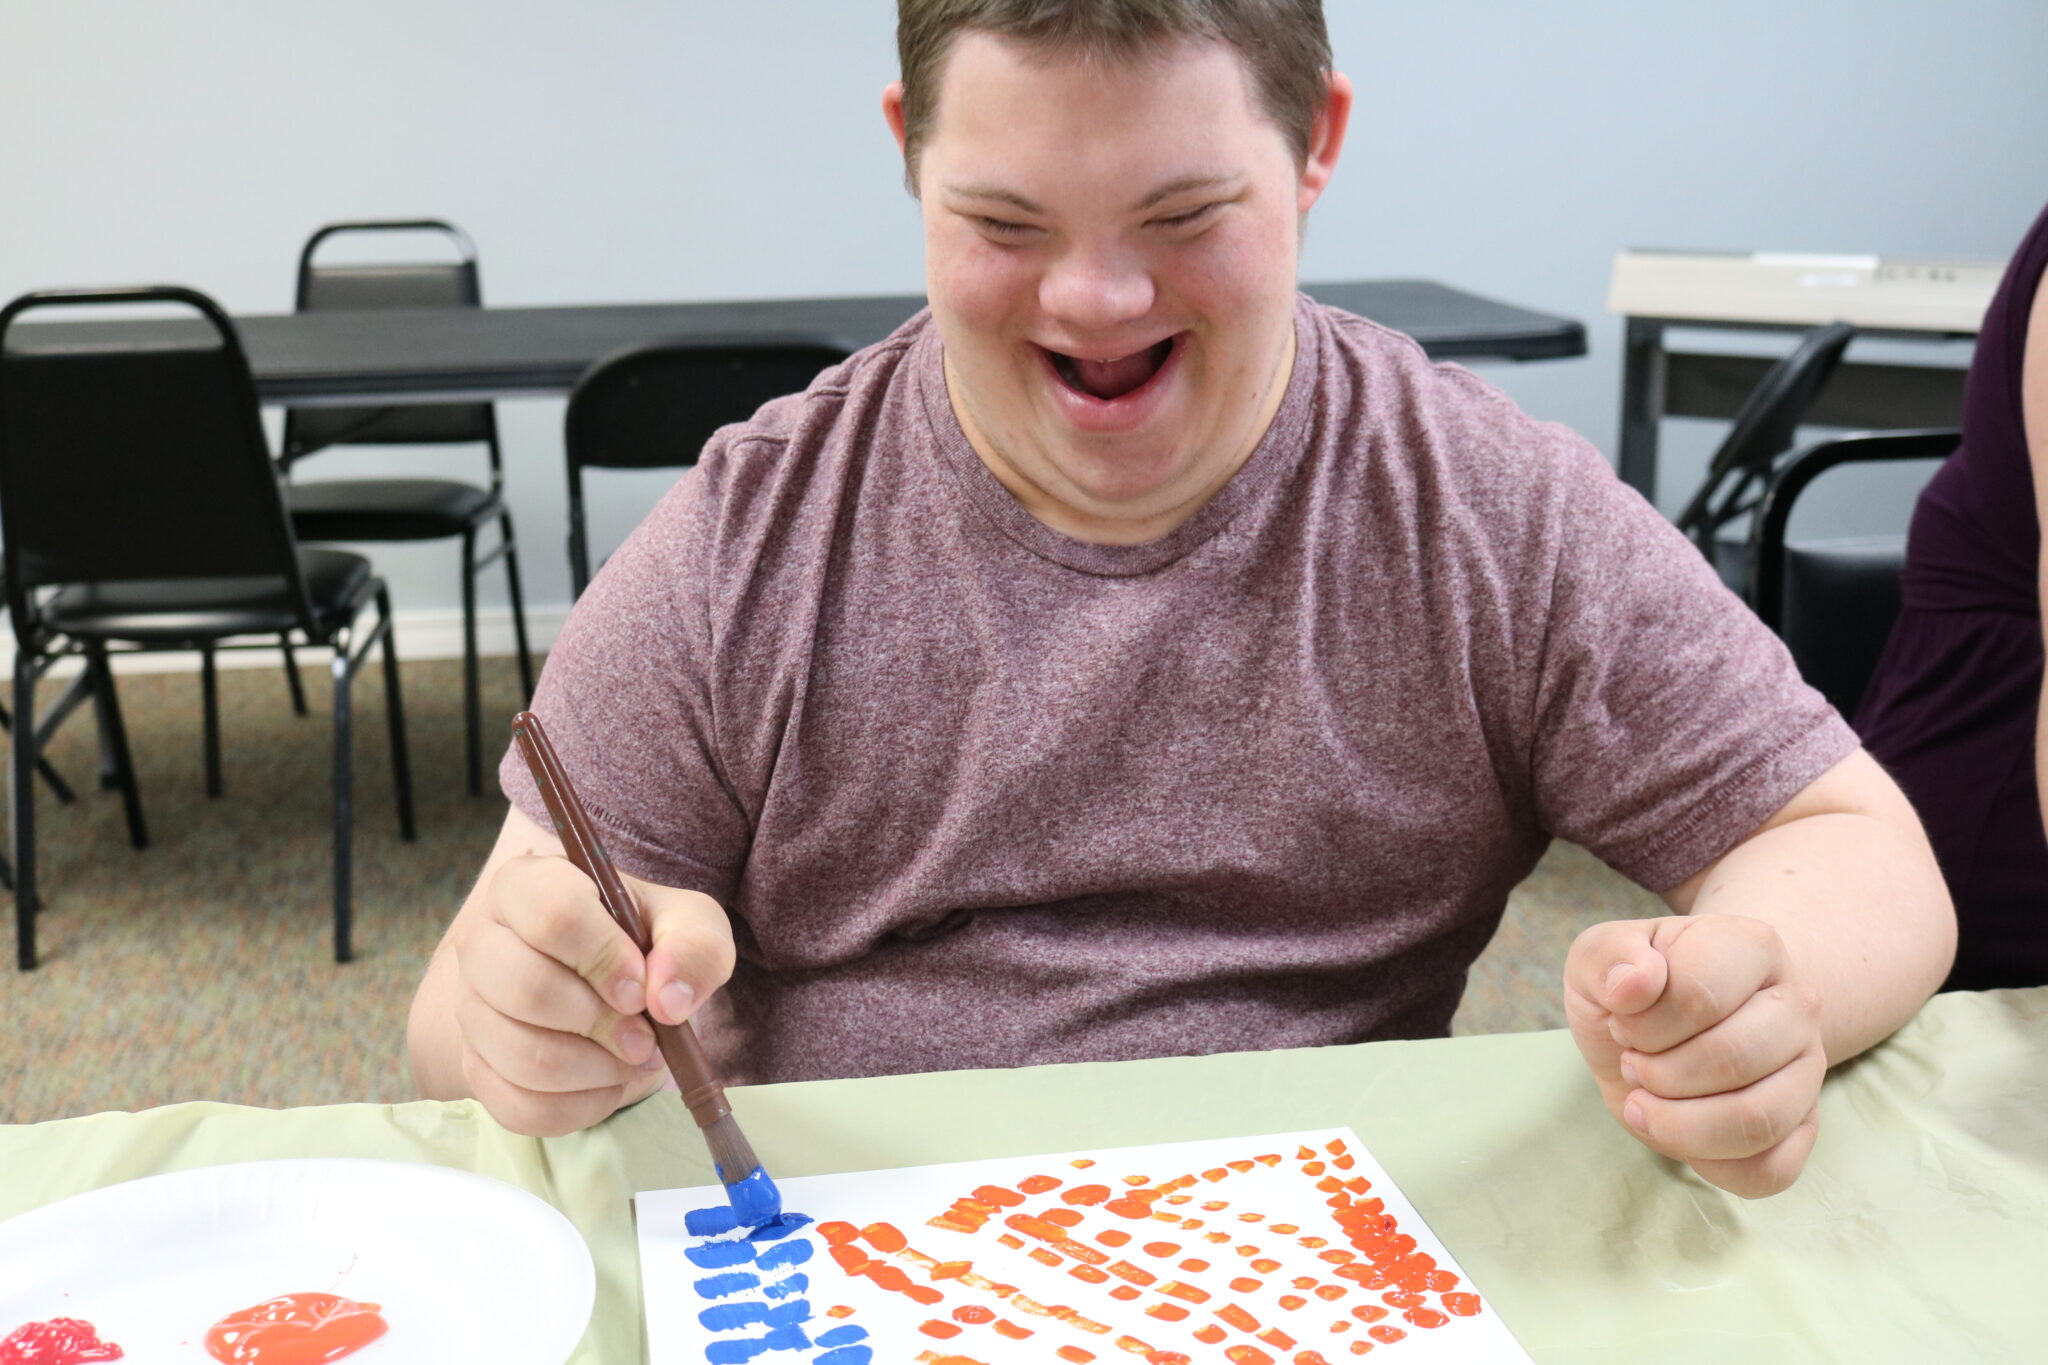 A student painting, with a big smile on his face.